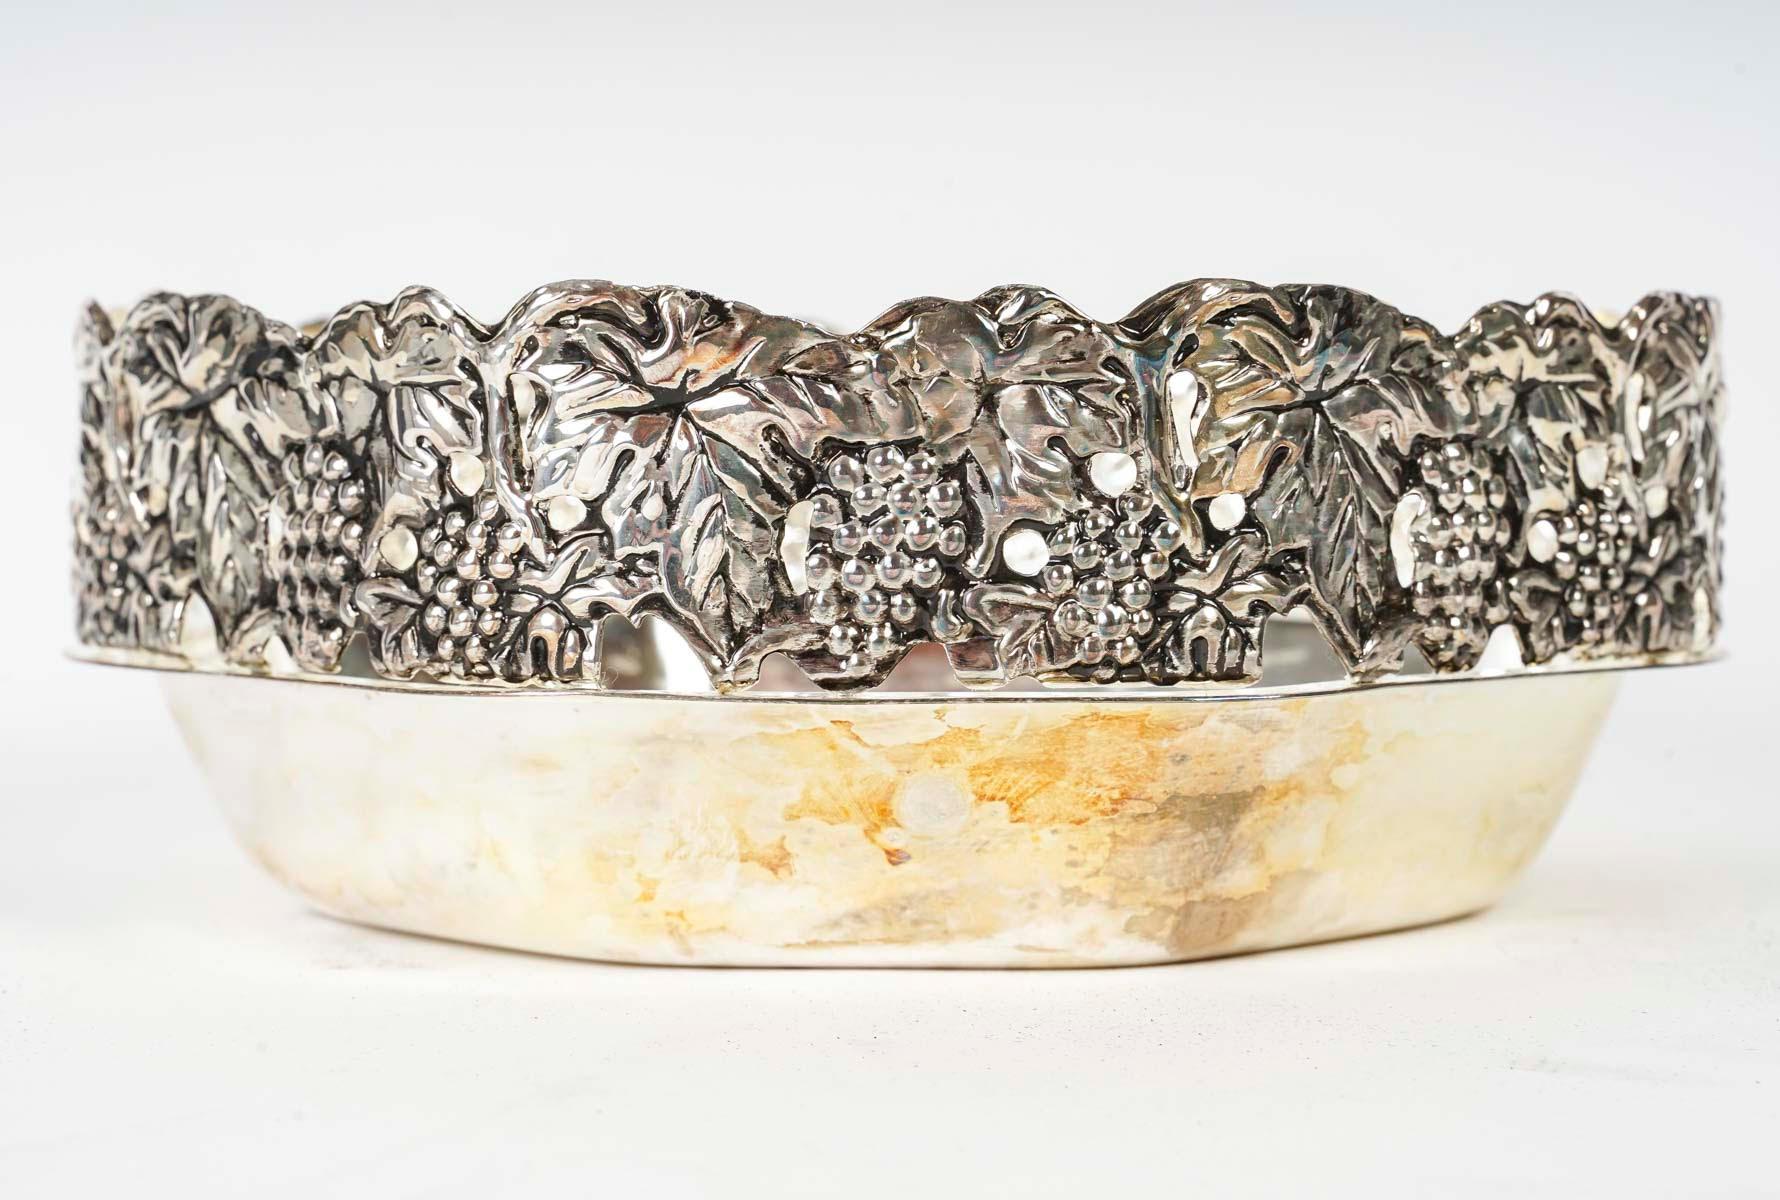 20th Century silver plated metal bowl.

Silver-plated metal bowl with vine decorations, 20th century.
h: 8cm, d: 22cm